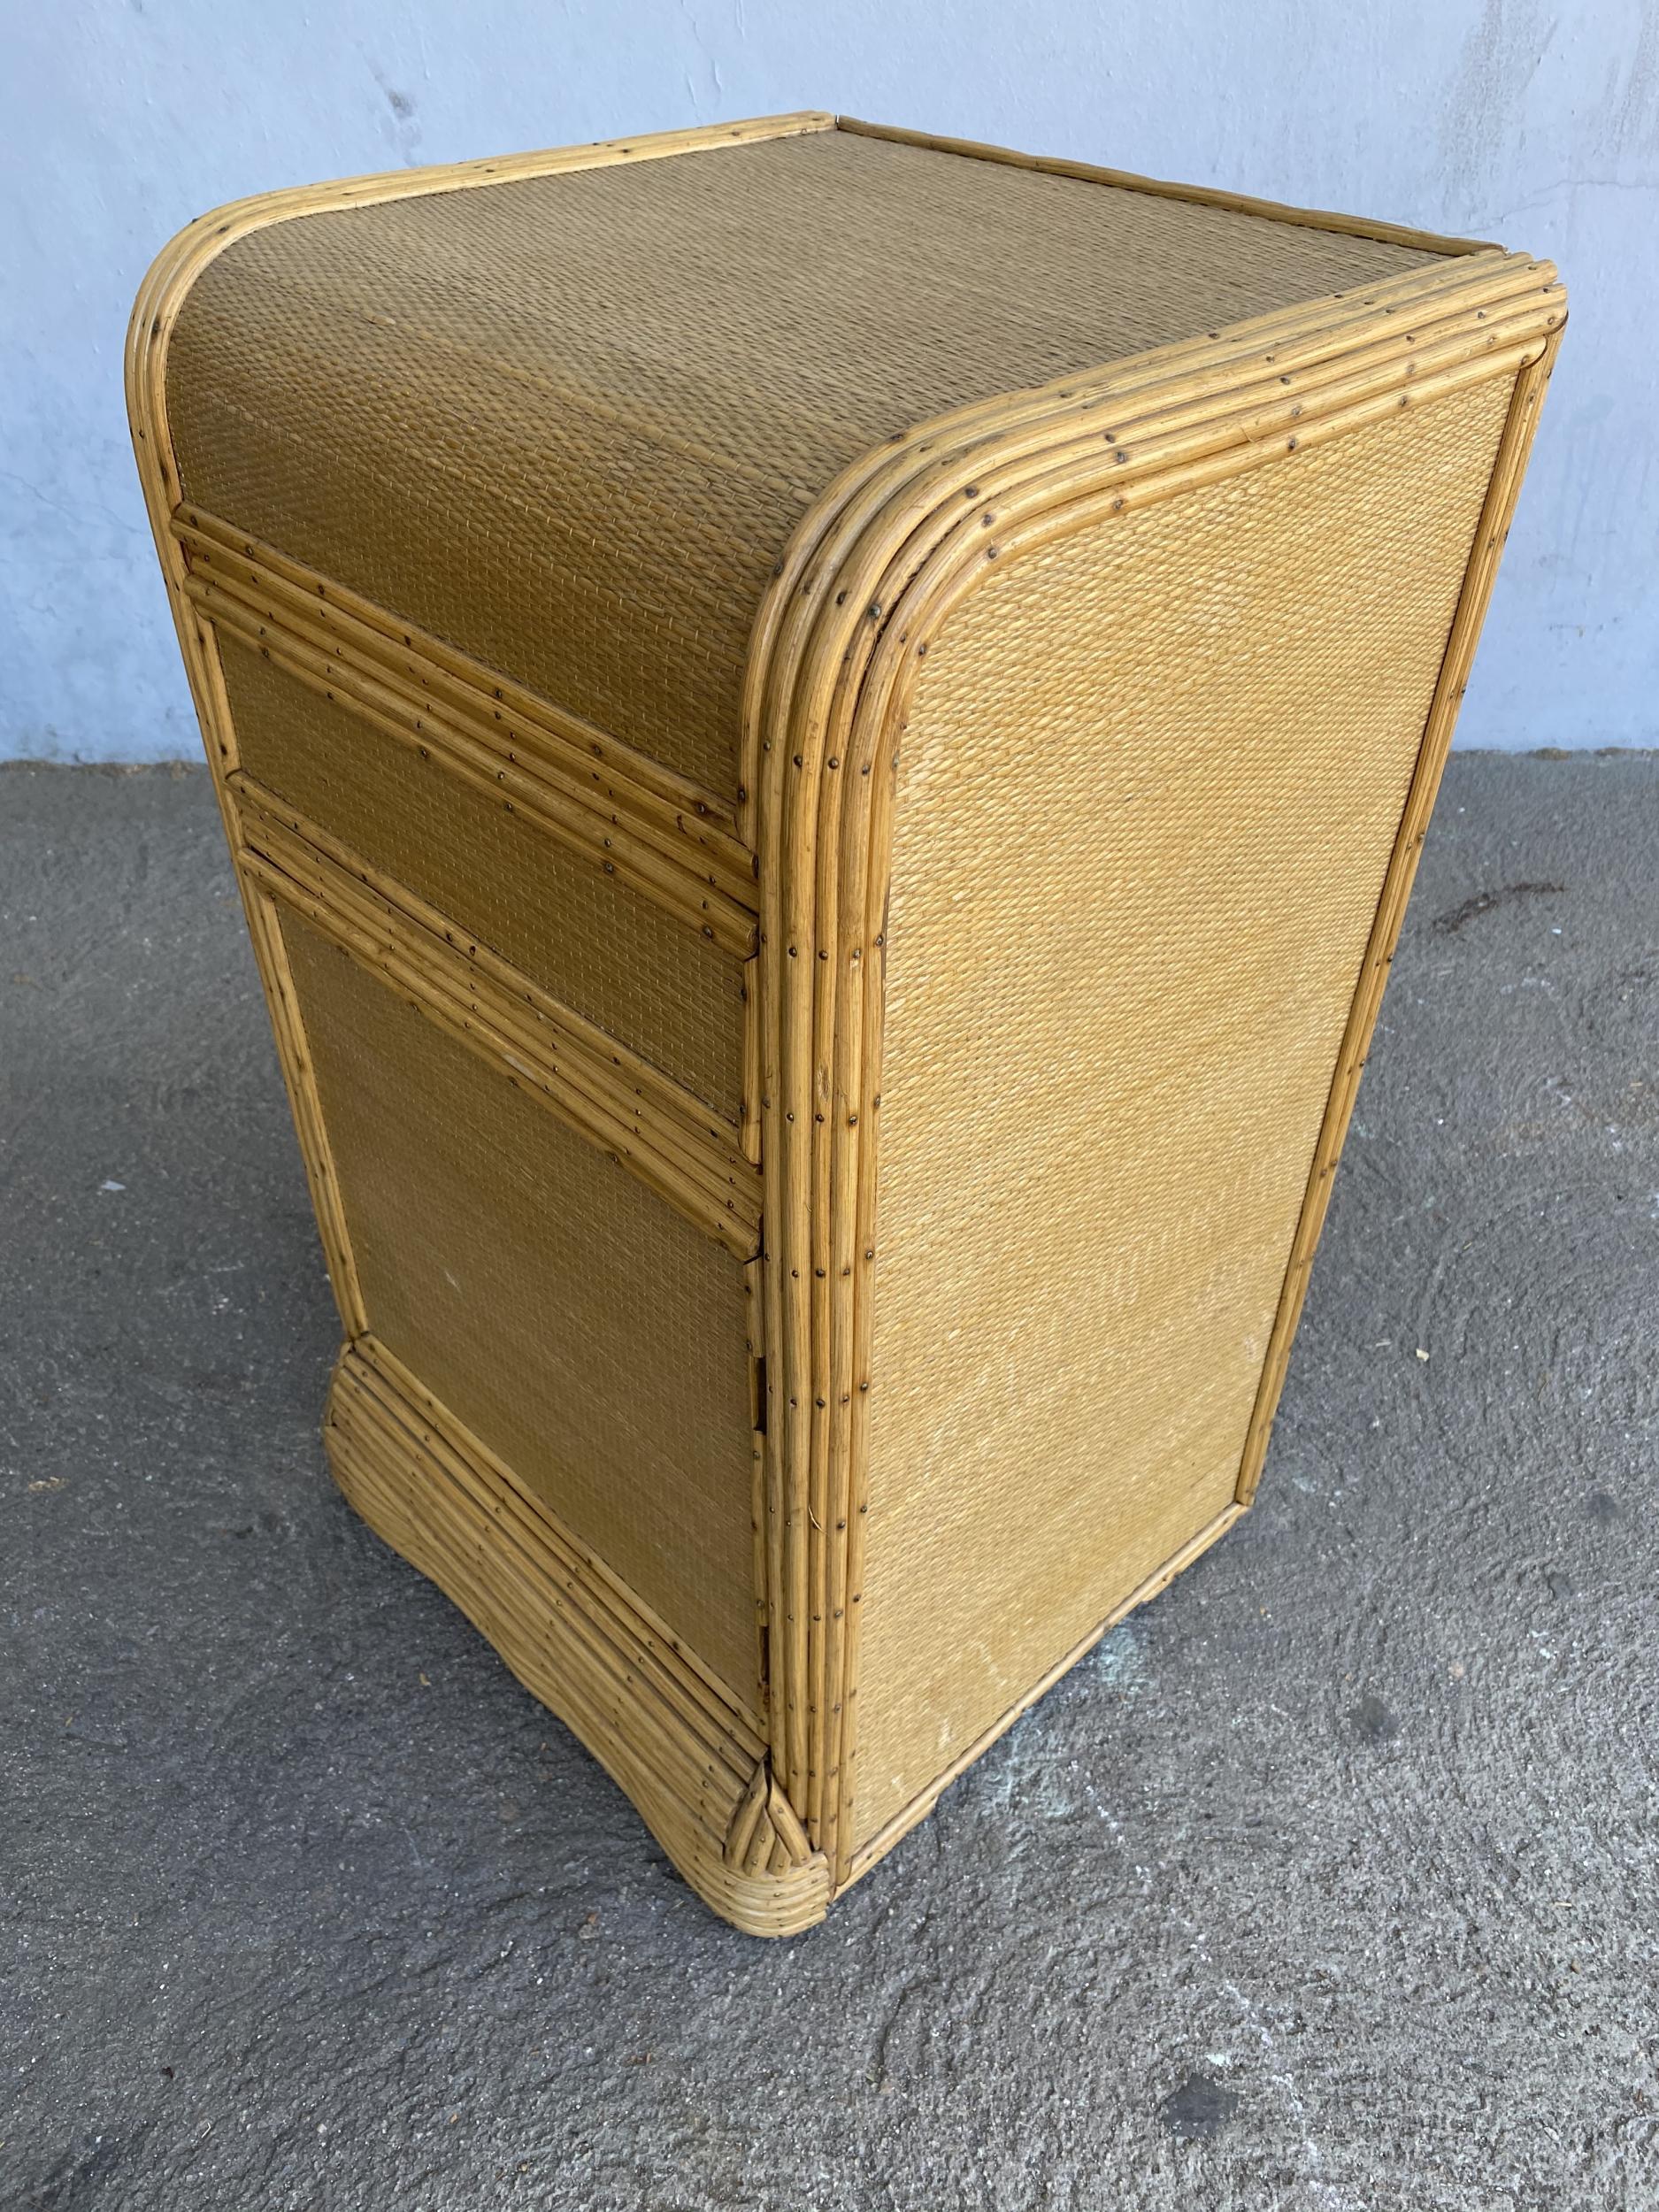 Streamline stick rattan side table with grass-mat coverings and edges are finished with brass nails. The side table features a single door that opens from the front.

Designed in the manner of Paul Frankl.

Restored to new for you.

All